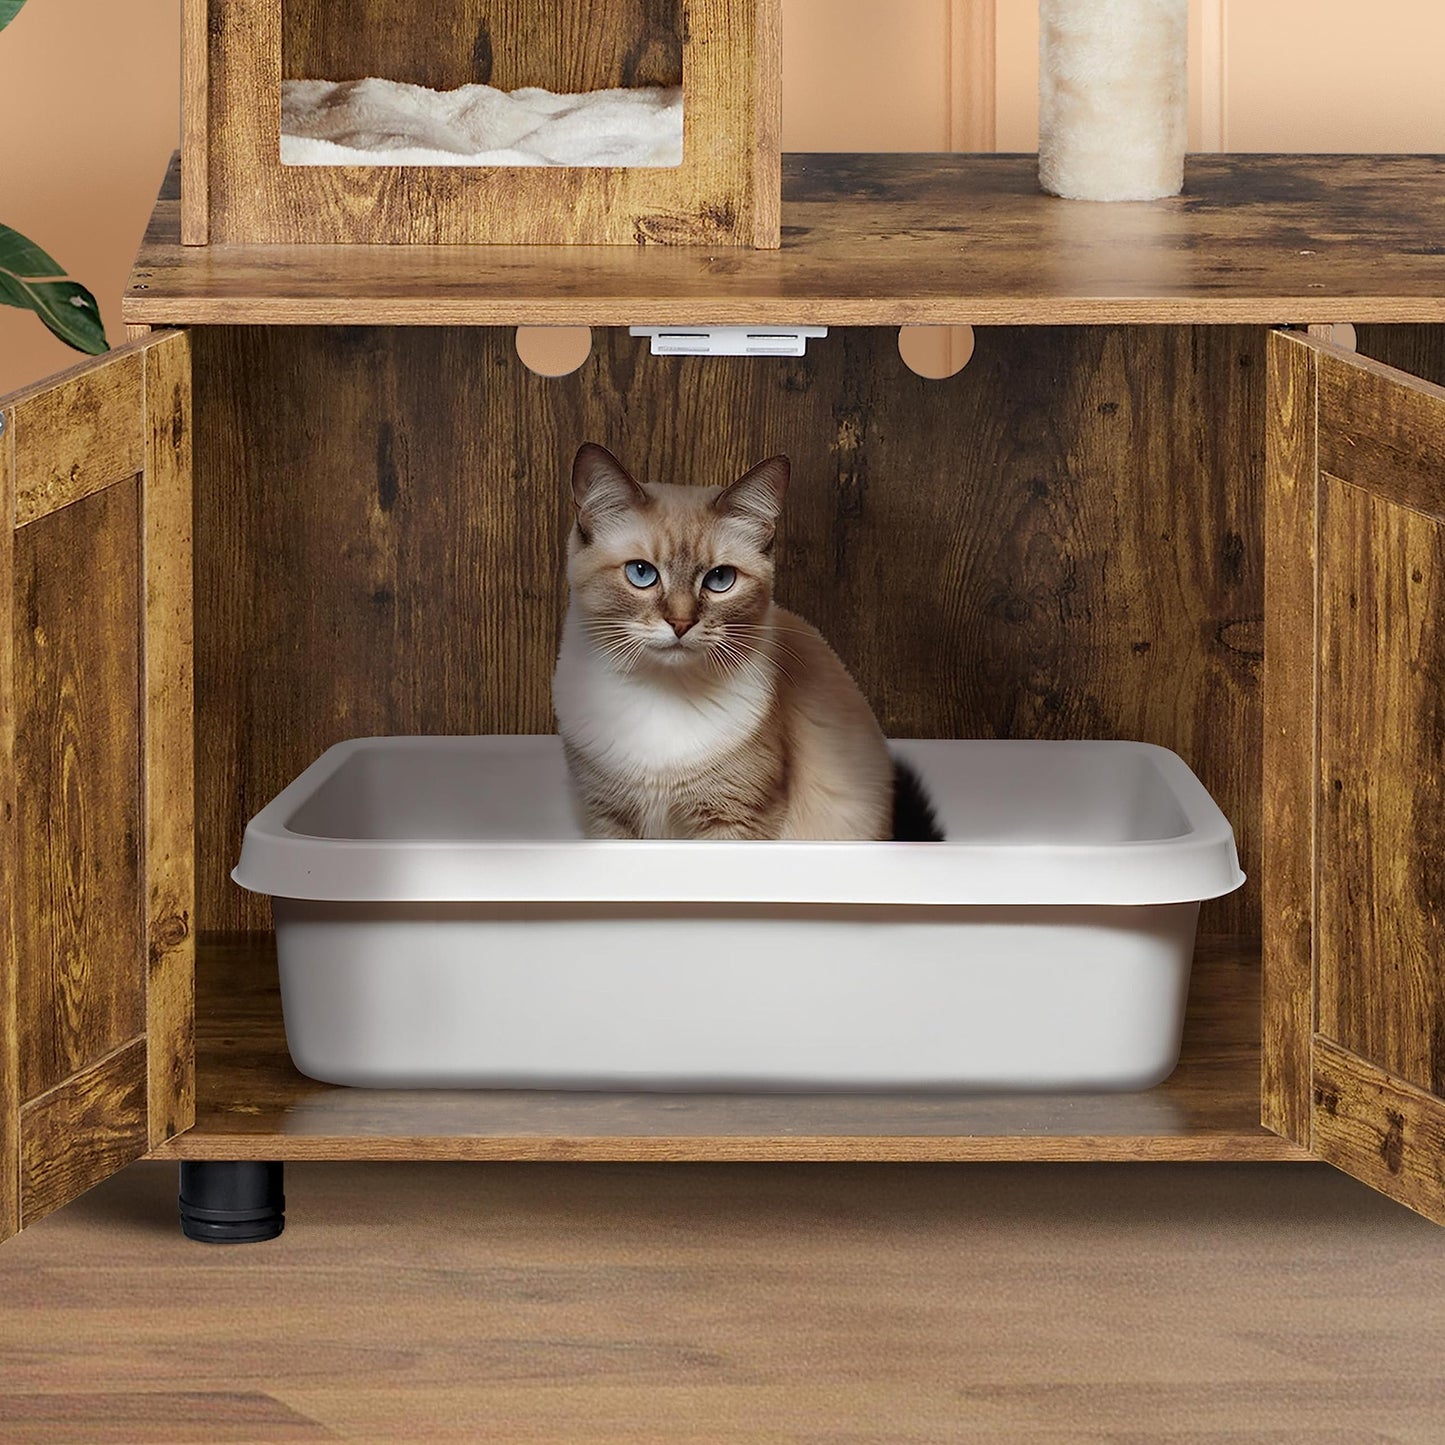 Yaheetech Litter Box Enclosure with Cat Tree, All-in-one Indoor Cat House w/Scratching Posts, Wooden Cat Litter Box Furniture w/Cat Condo, Platform, Rustic Brown/Beige